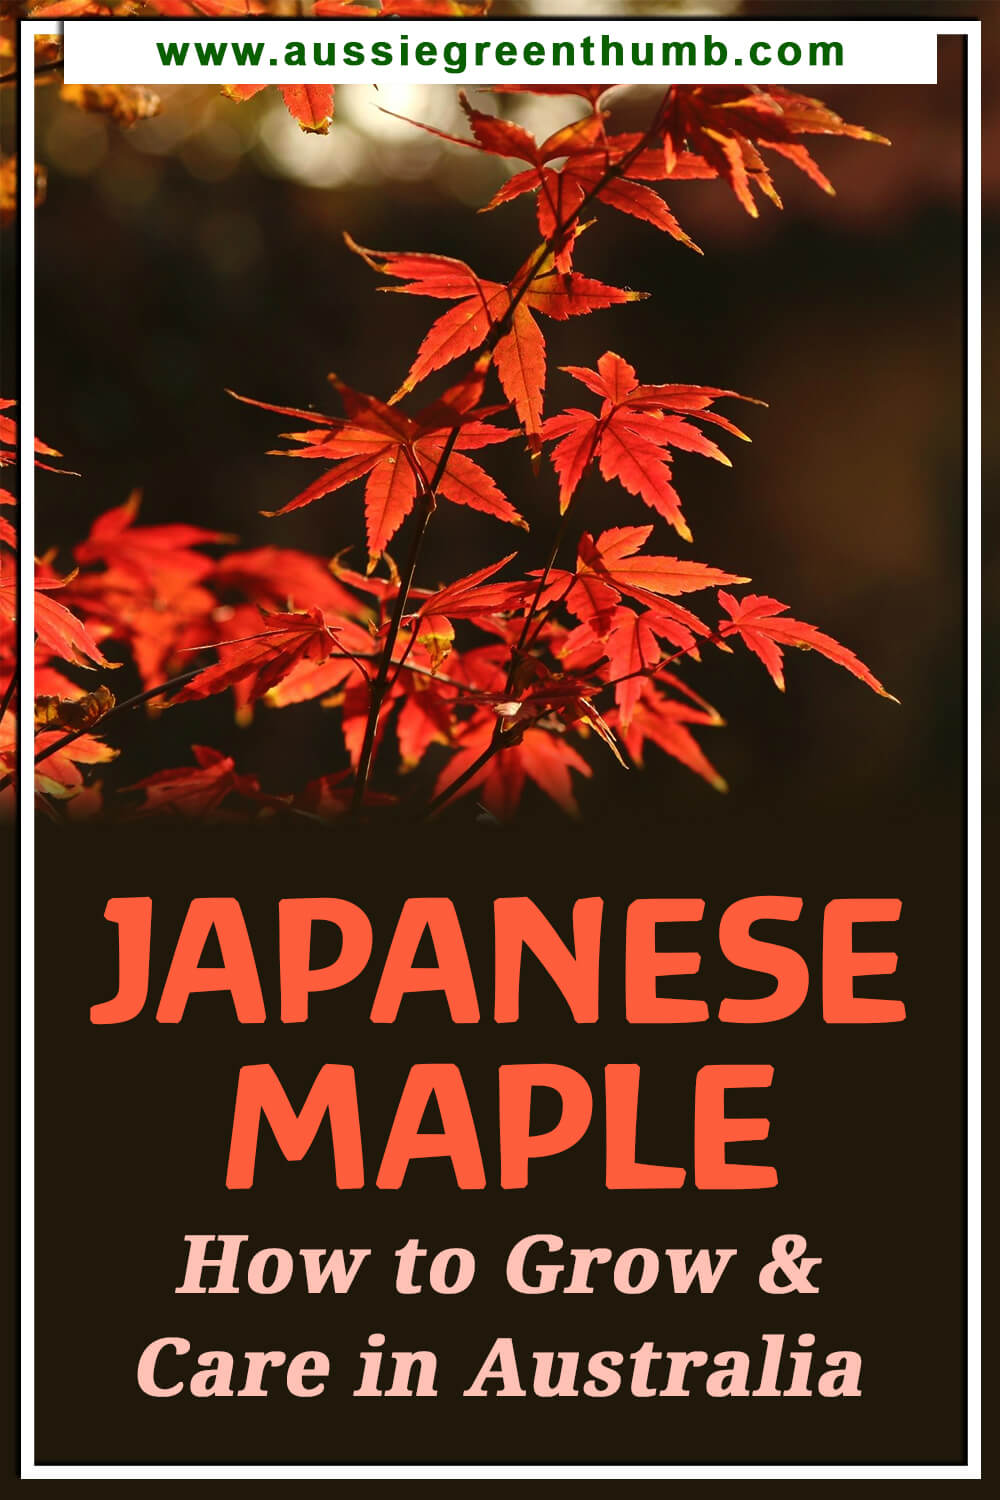 Japanese Maple – How to Grow & Care in Australia